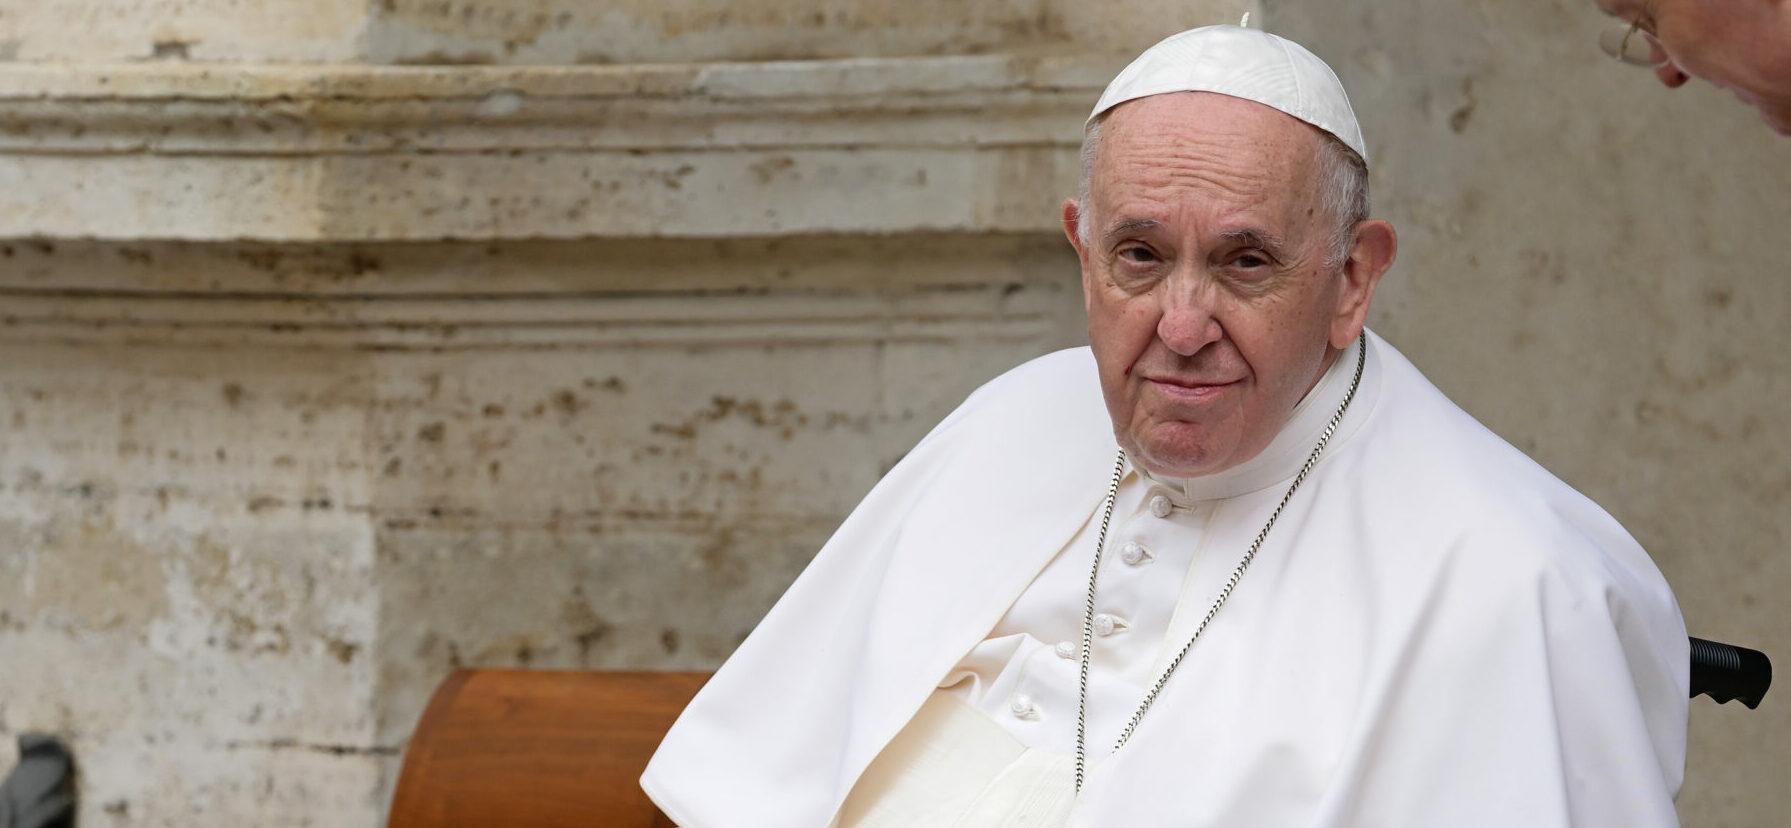 Pope Francis Hints That The Catholic Church Could Begin Blessing Same-Sex Couples